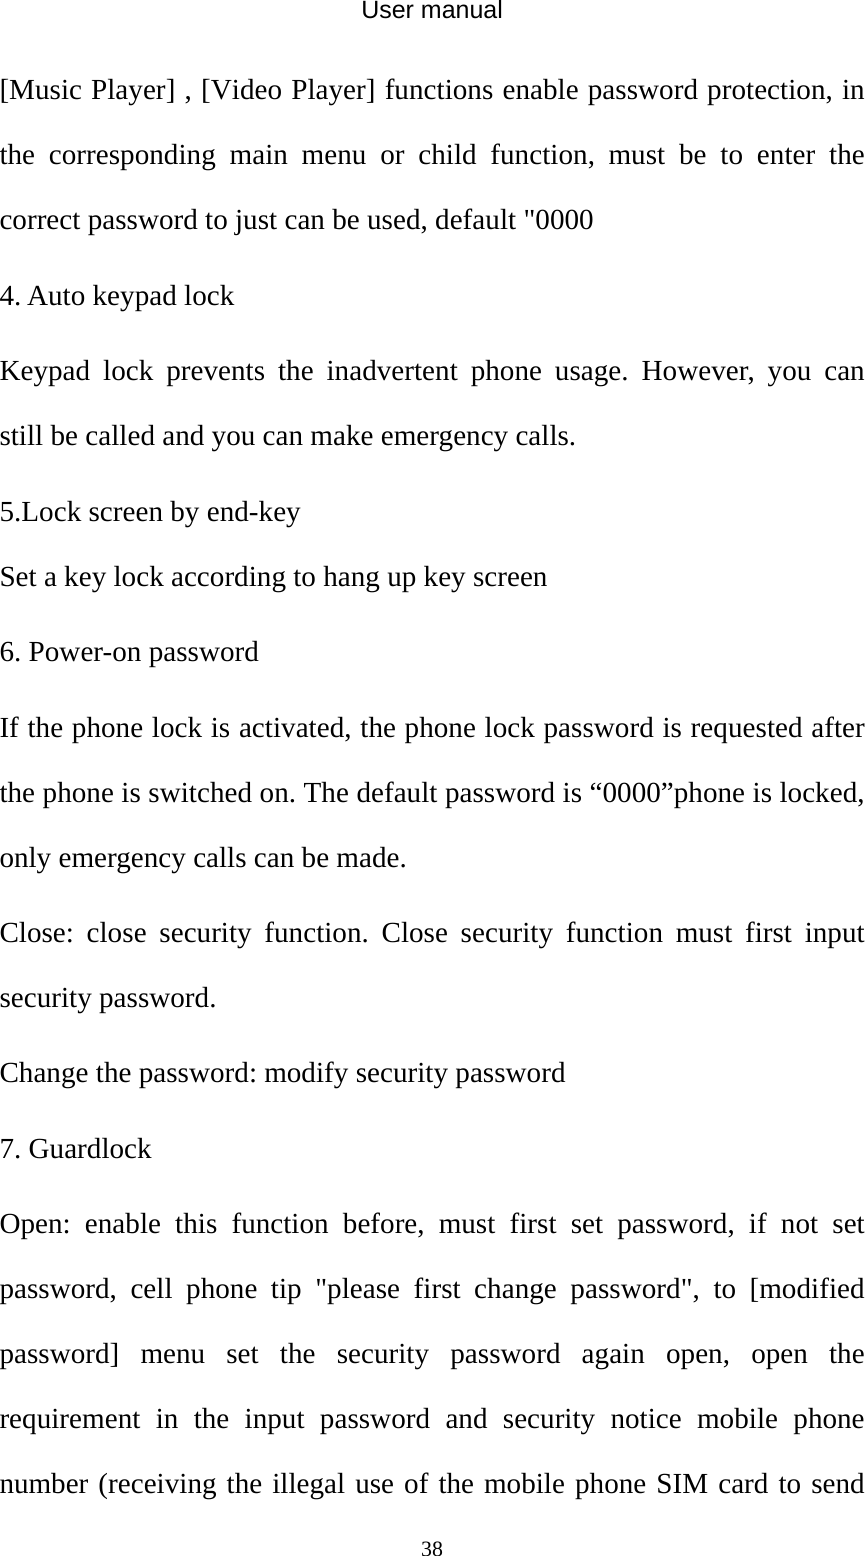 User manual  38[Music Player] , [Video Player] functions enable password protection, in the corresponding main menu or child function, must be to enter the correct password to just can be used, default &quot;0000 4. Auto keypad lock Keypad lock prevents the inadvertent phone usage. However, you can still be called and you can make emergency calls. 5.Lock screen by end-key Set a key lock according to hang up key screen 6. Power-on password If the phone lock is activated, the phone lock password is requested after the phone is switched on. The default password is “0000”phone is locked, only emergency calls can be made. Close: close security function. Close security function must first input security password.   Change the password: modify security password 7. Guardlock Open: enable this function before, must first set password, if not set password, cell phone tip &quot;please first change password&quot;, to [modified password] menu set the security password again open, open the requirement in the input password and security notice mobile phone number (receiving the illegal use of the mobile phone SIM card to send 